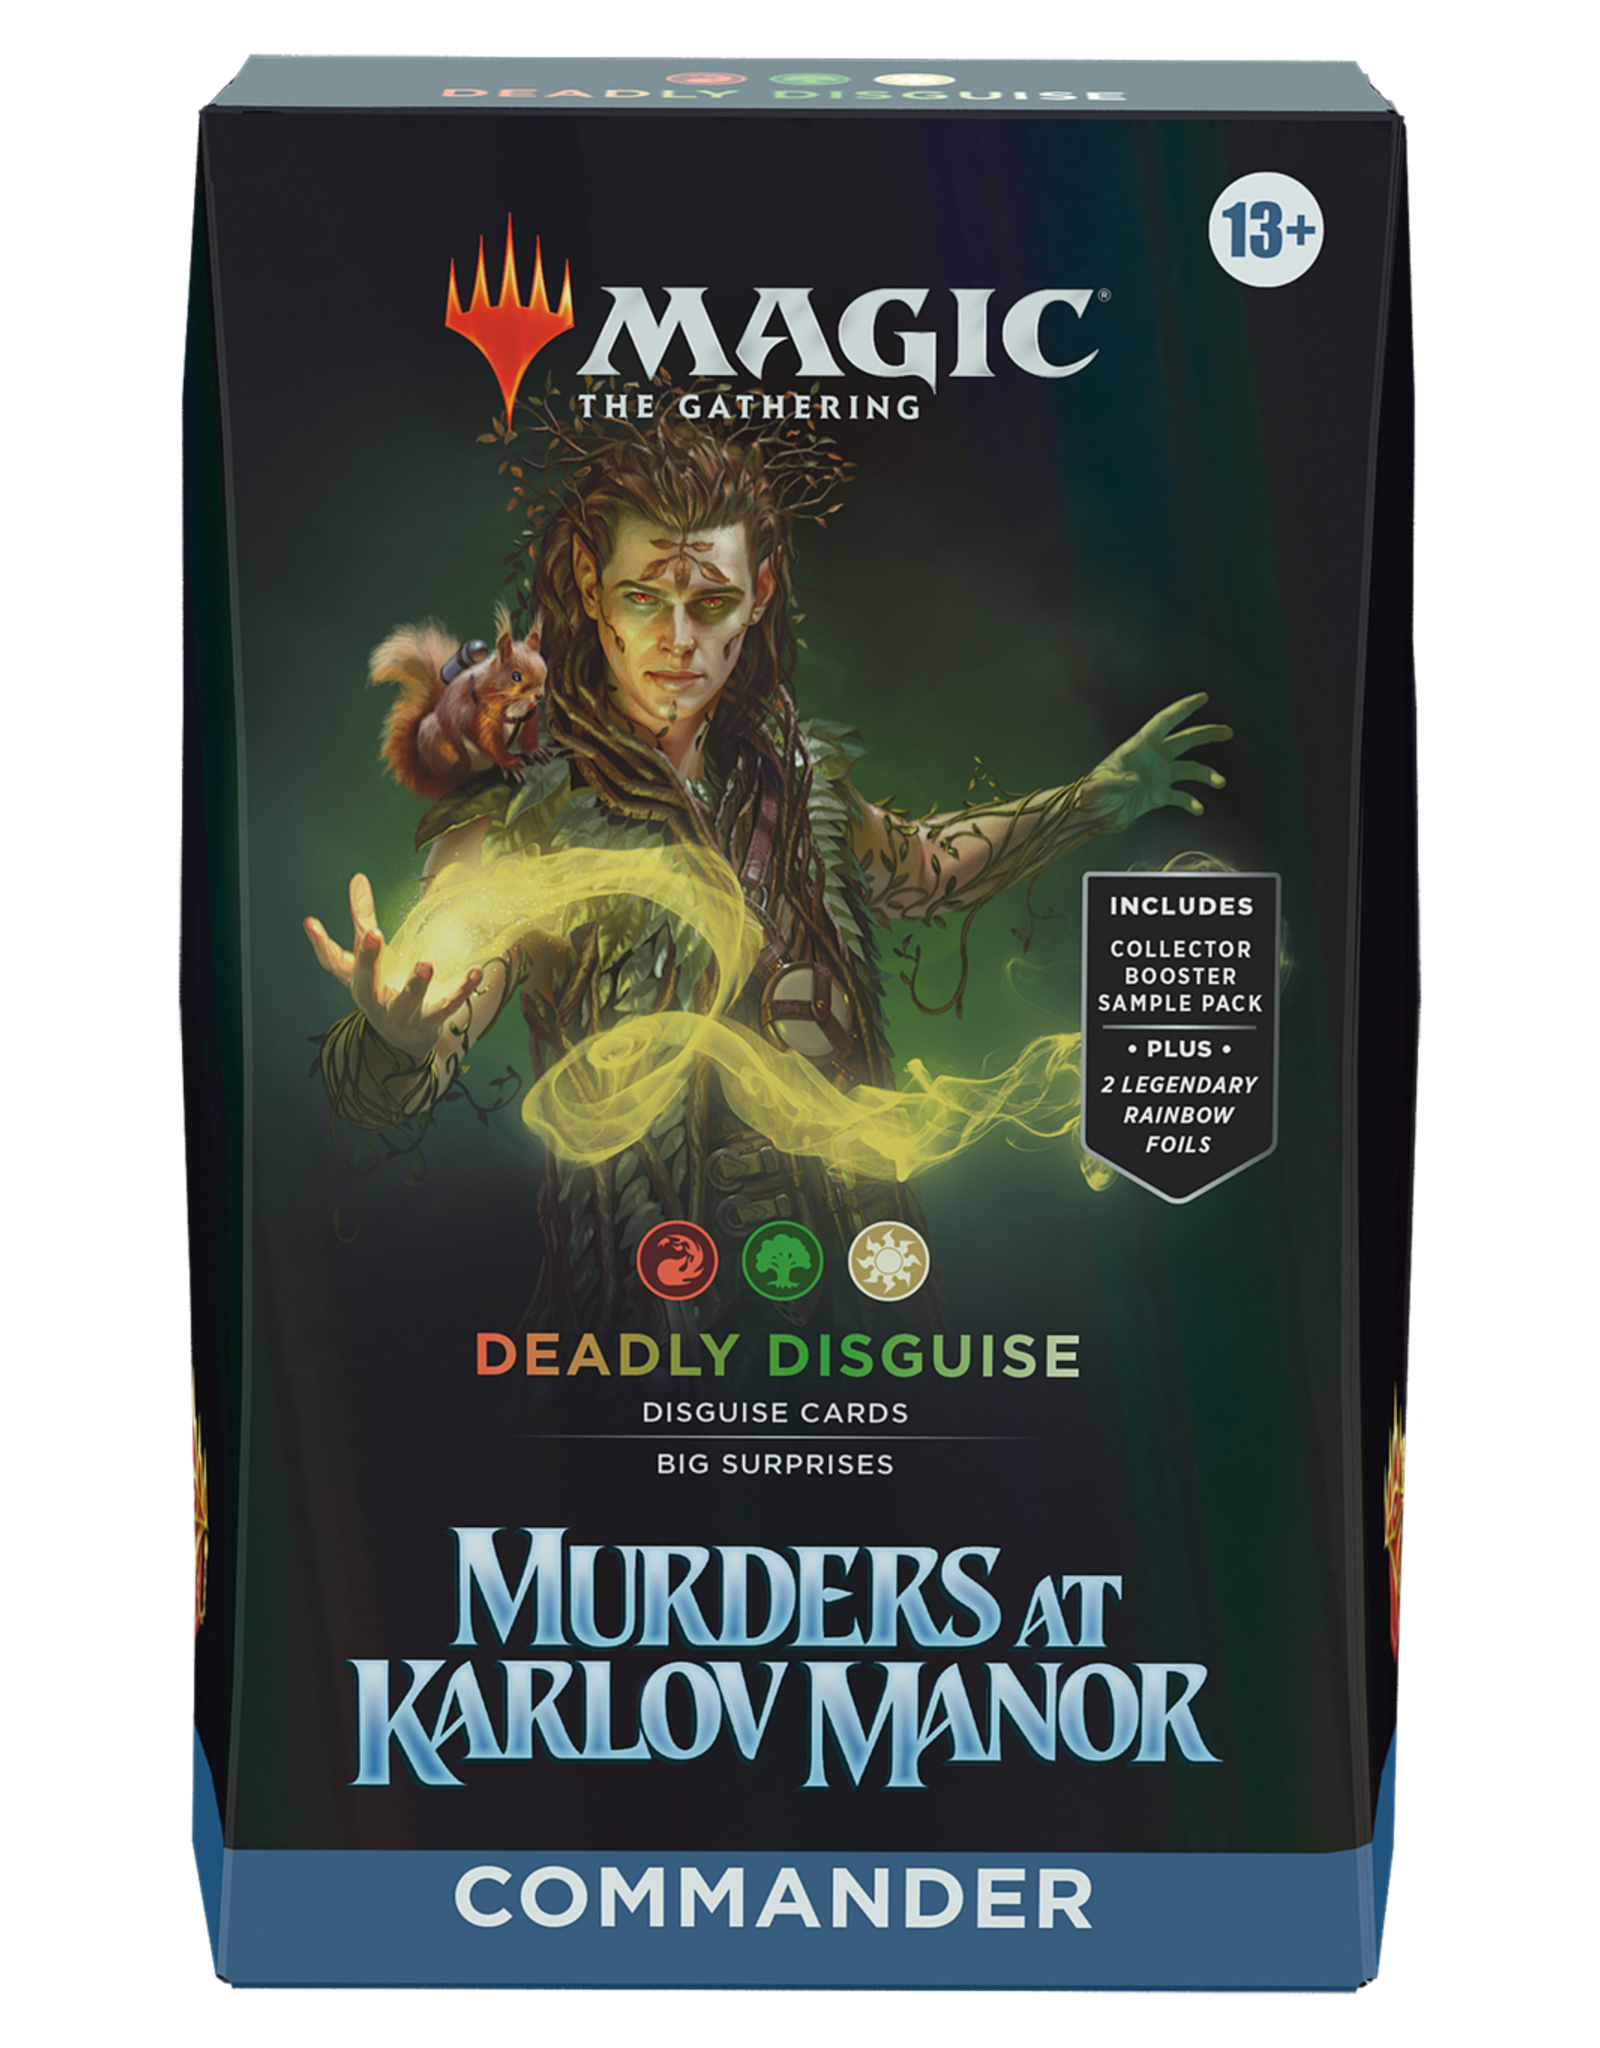 Magic MTG Murders at Karlov Manor Commander: Deadly Disguise